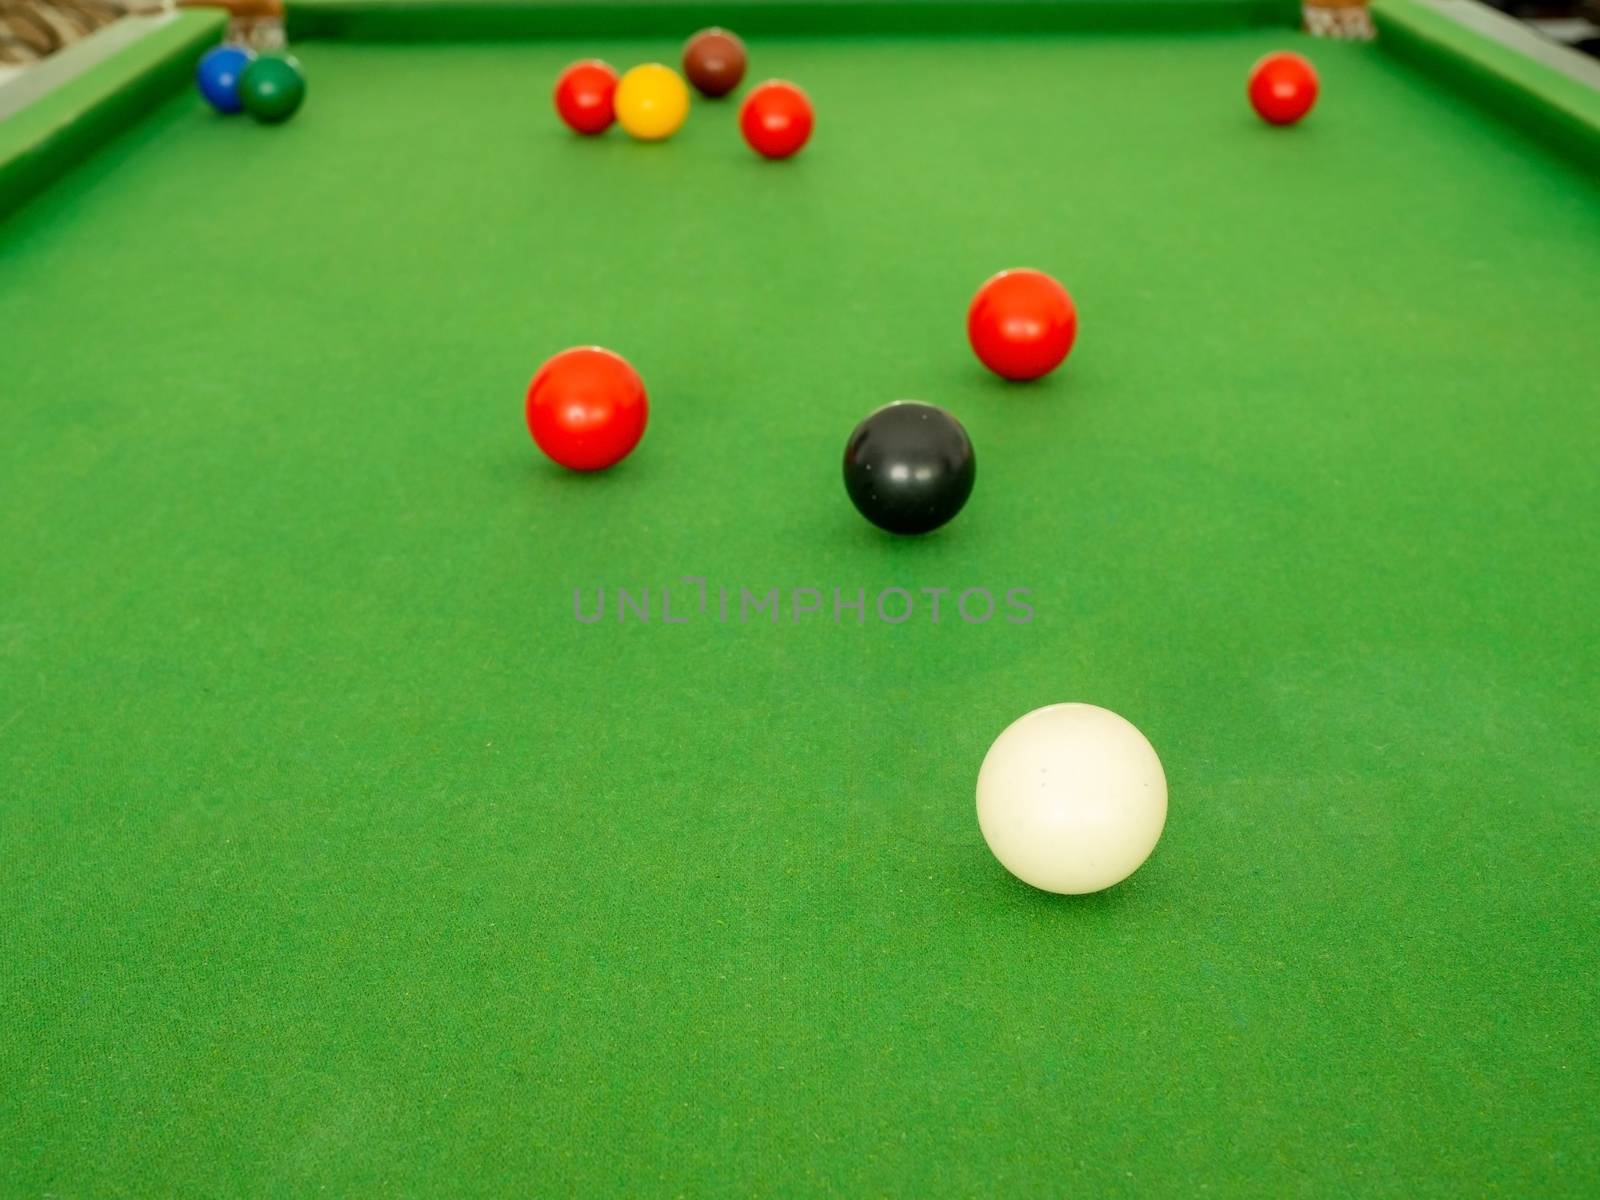 Snooker ball On the green snooker table by Unimages2527